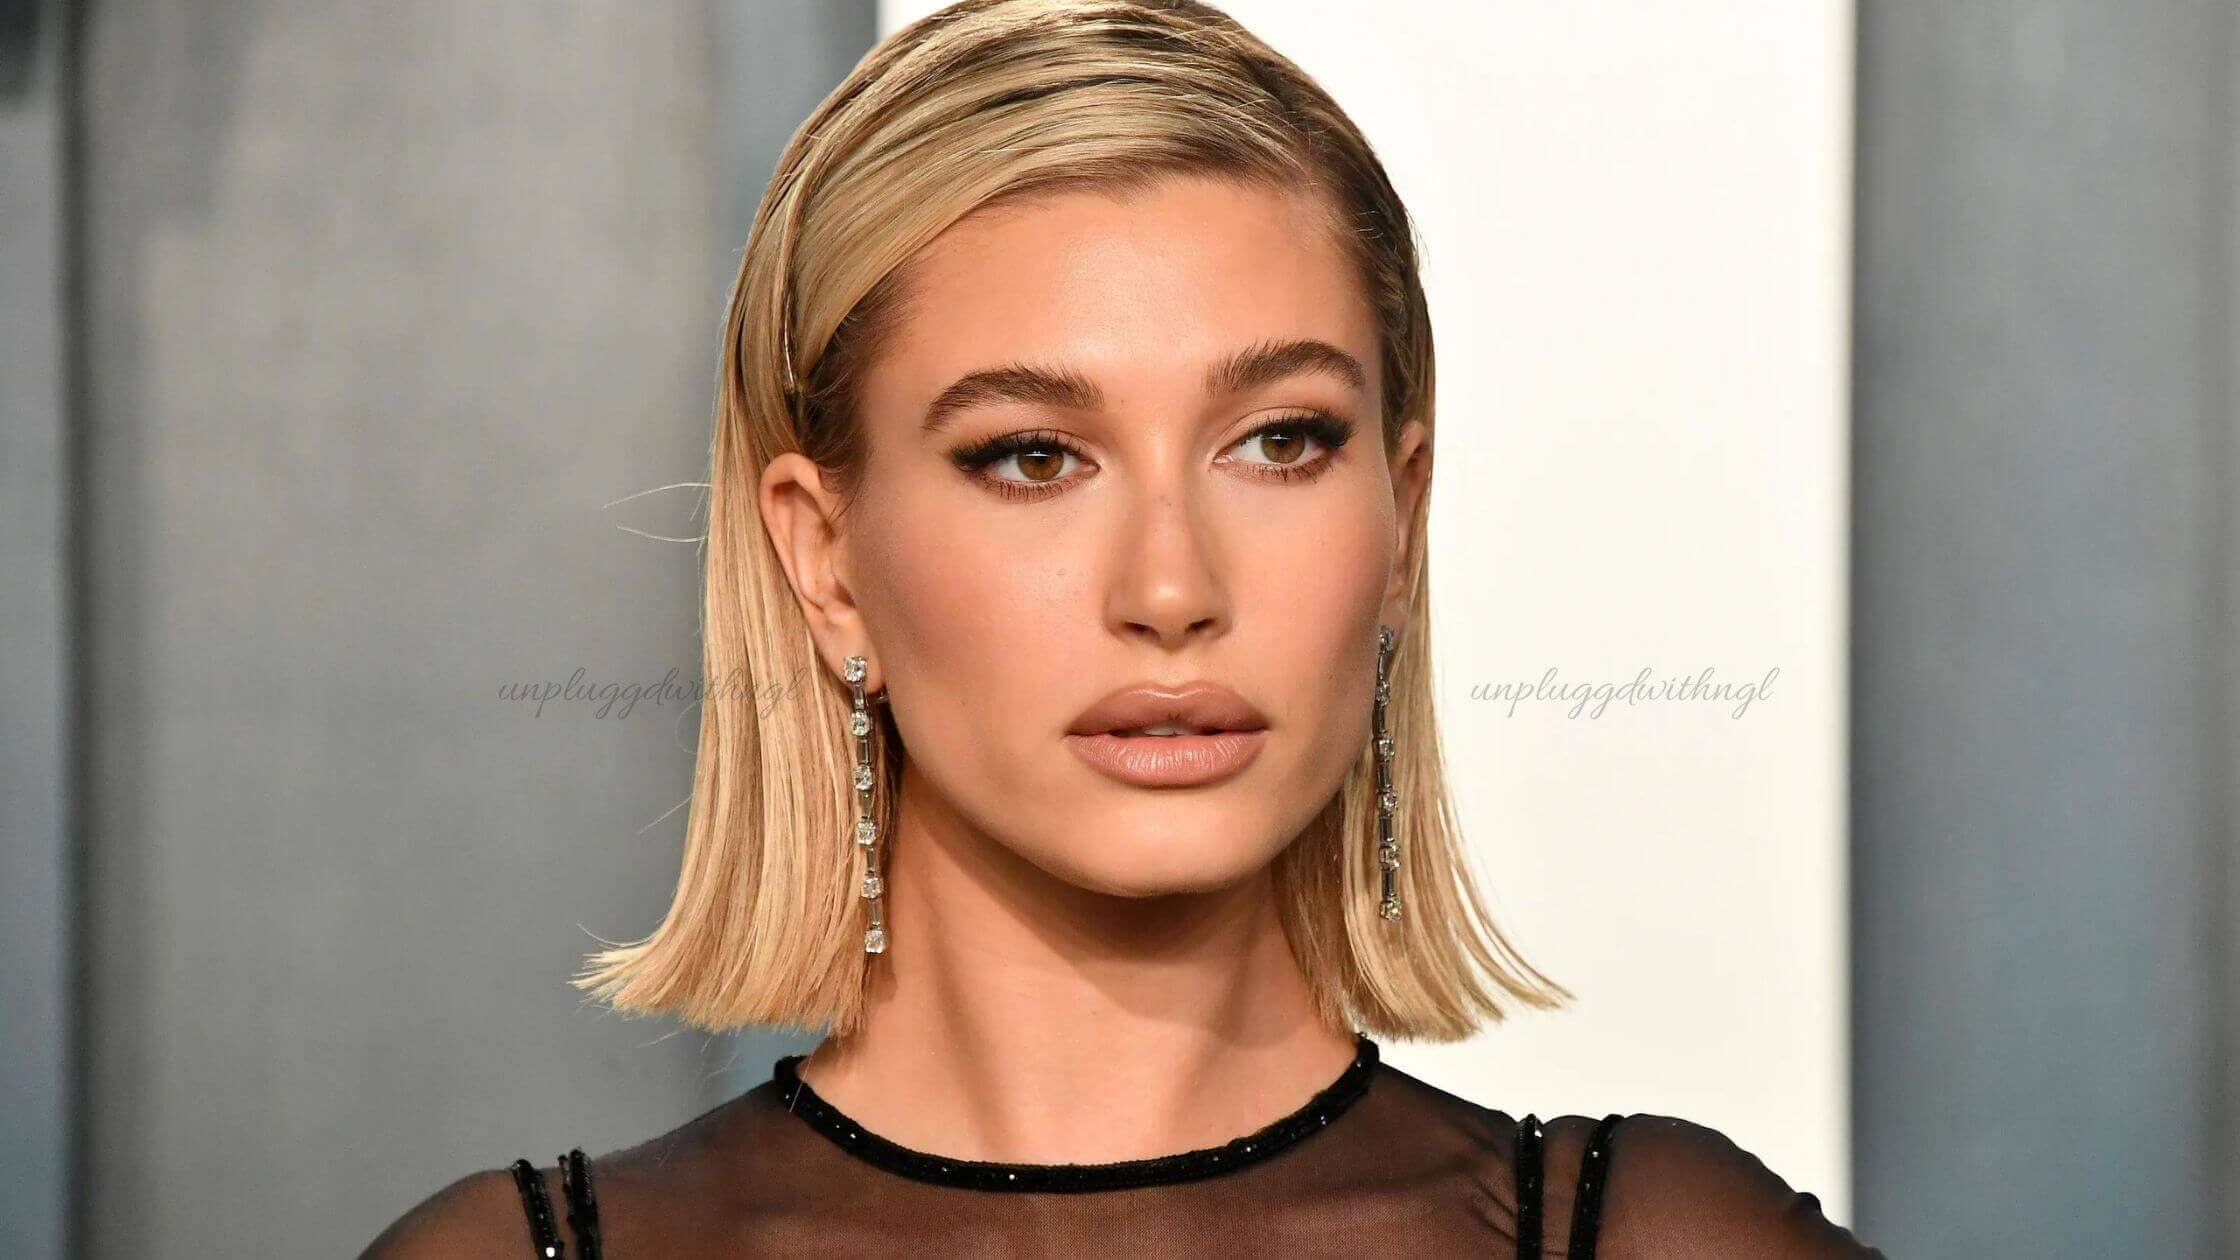 Trademark Infringement After Launching Skincare Line! Hailey Bieber Sued By Fashion Creators